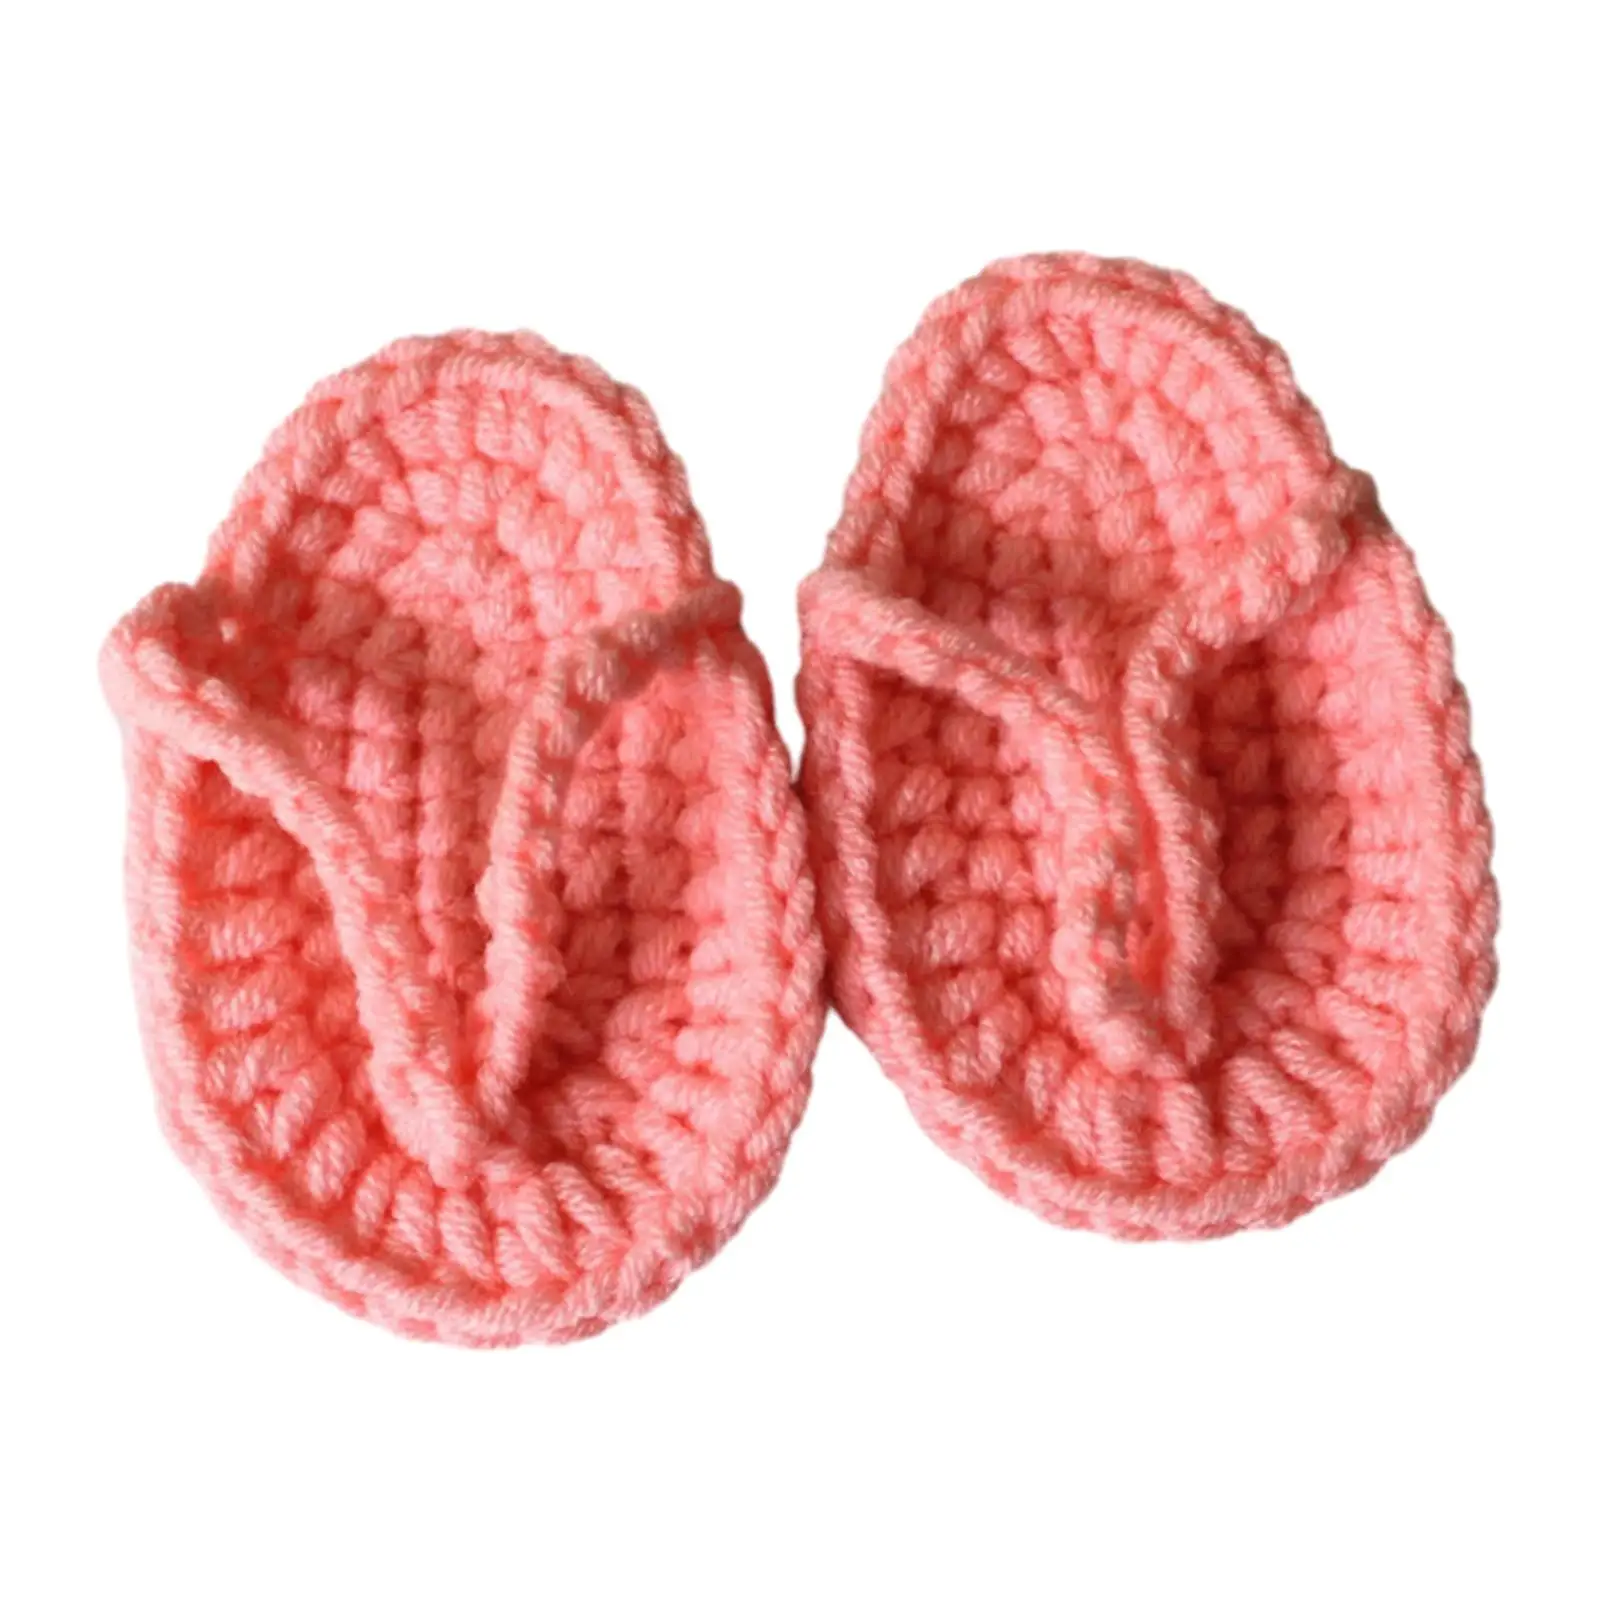 Infant Slippers Newborn Props Cozy Shoes 2.75inch Shoes Solid Crochet Decor Hand Knitting Newborn Photography Props Mini 1Pair